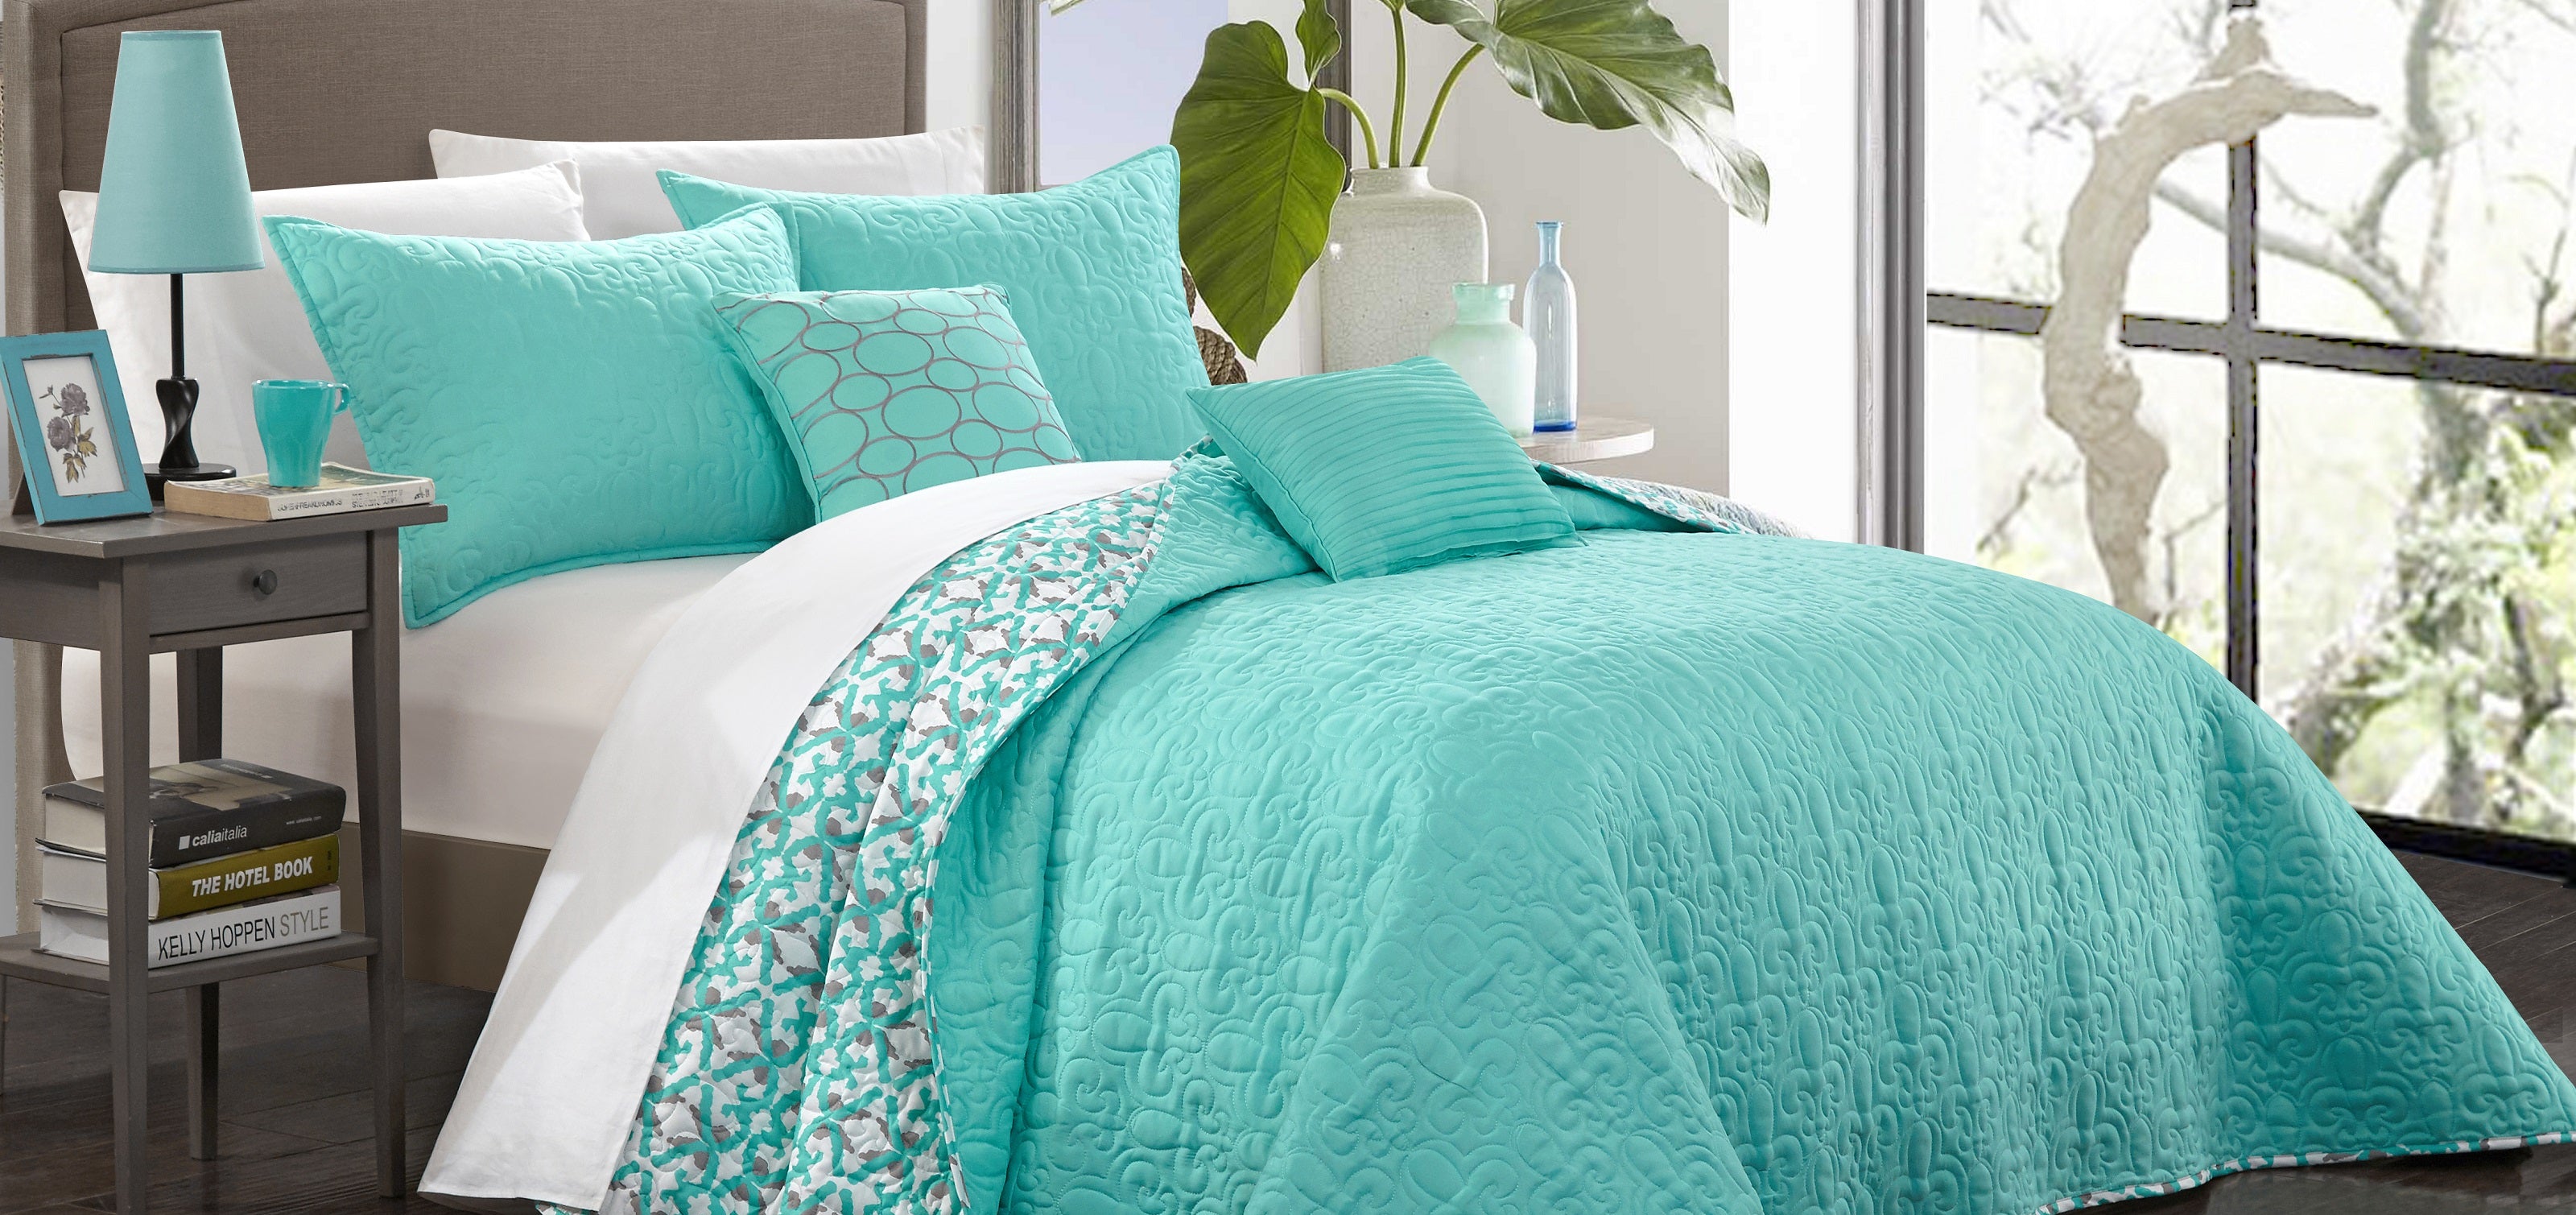 Luxury Quilt Sets | Free Shipping over $99 | Chic Home